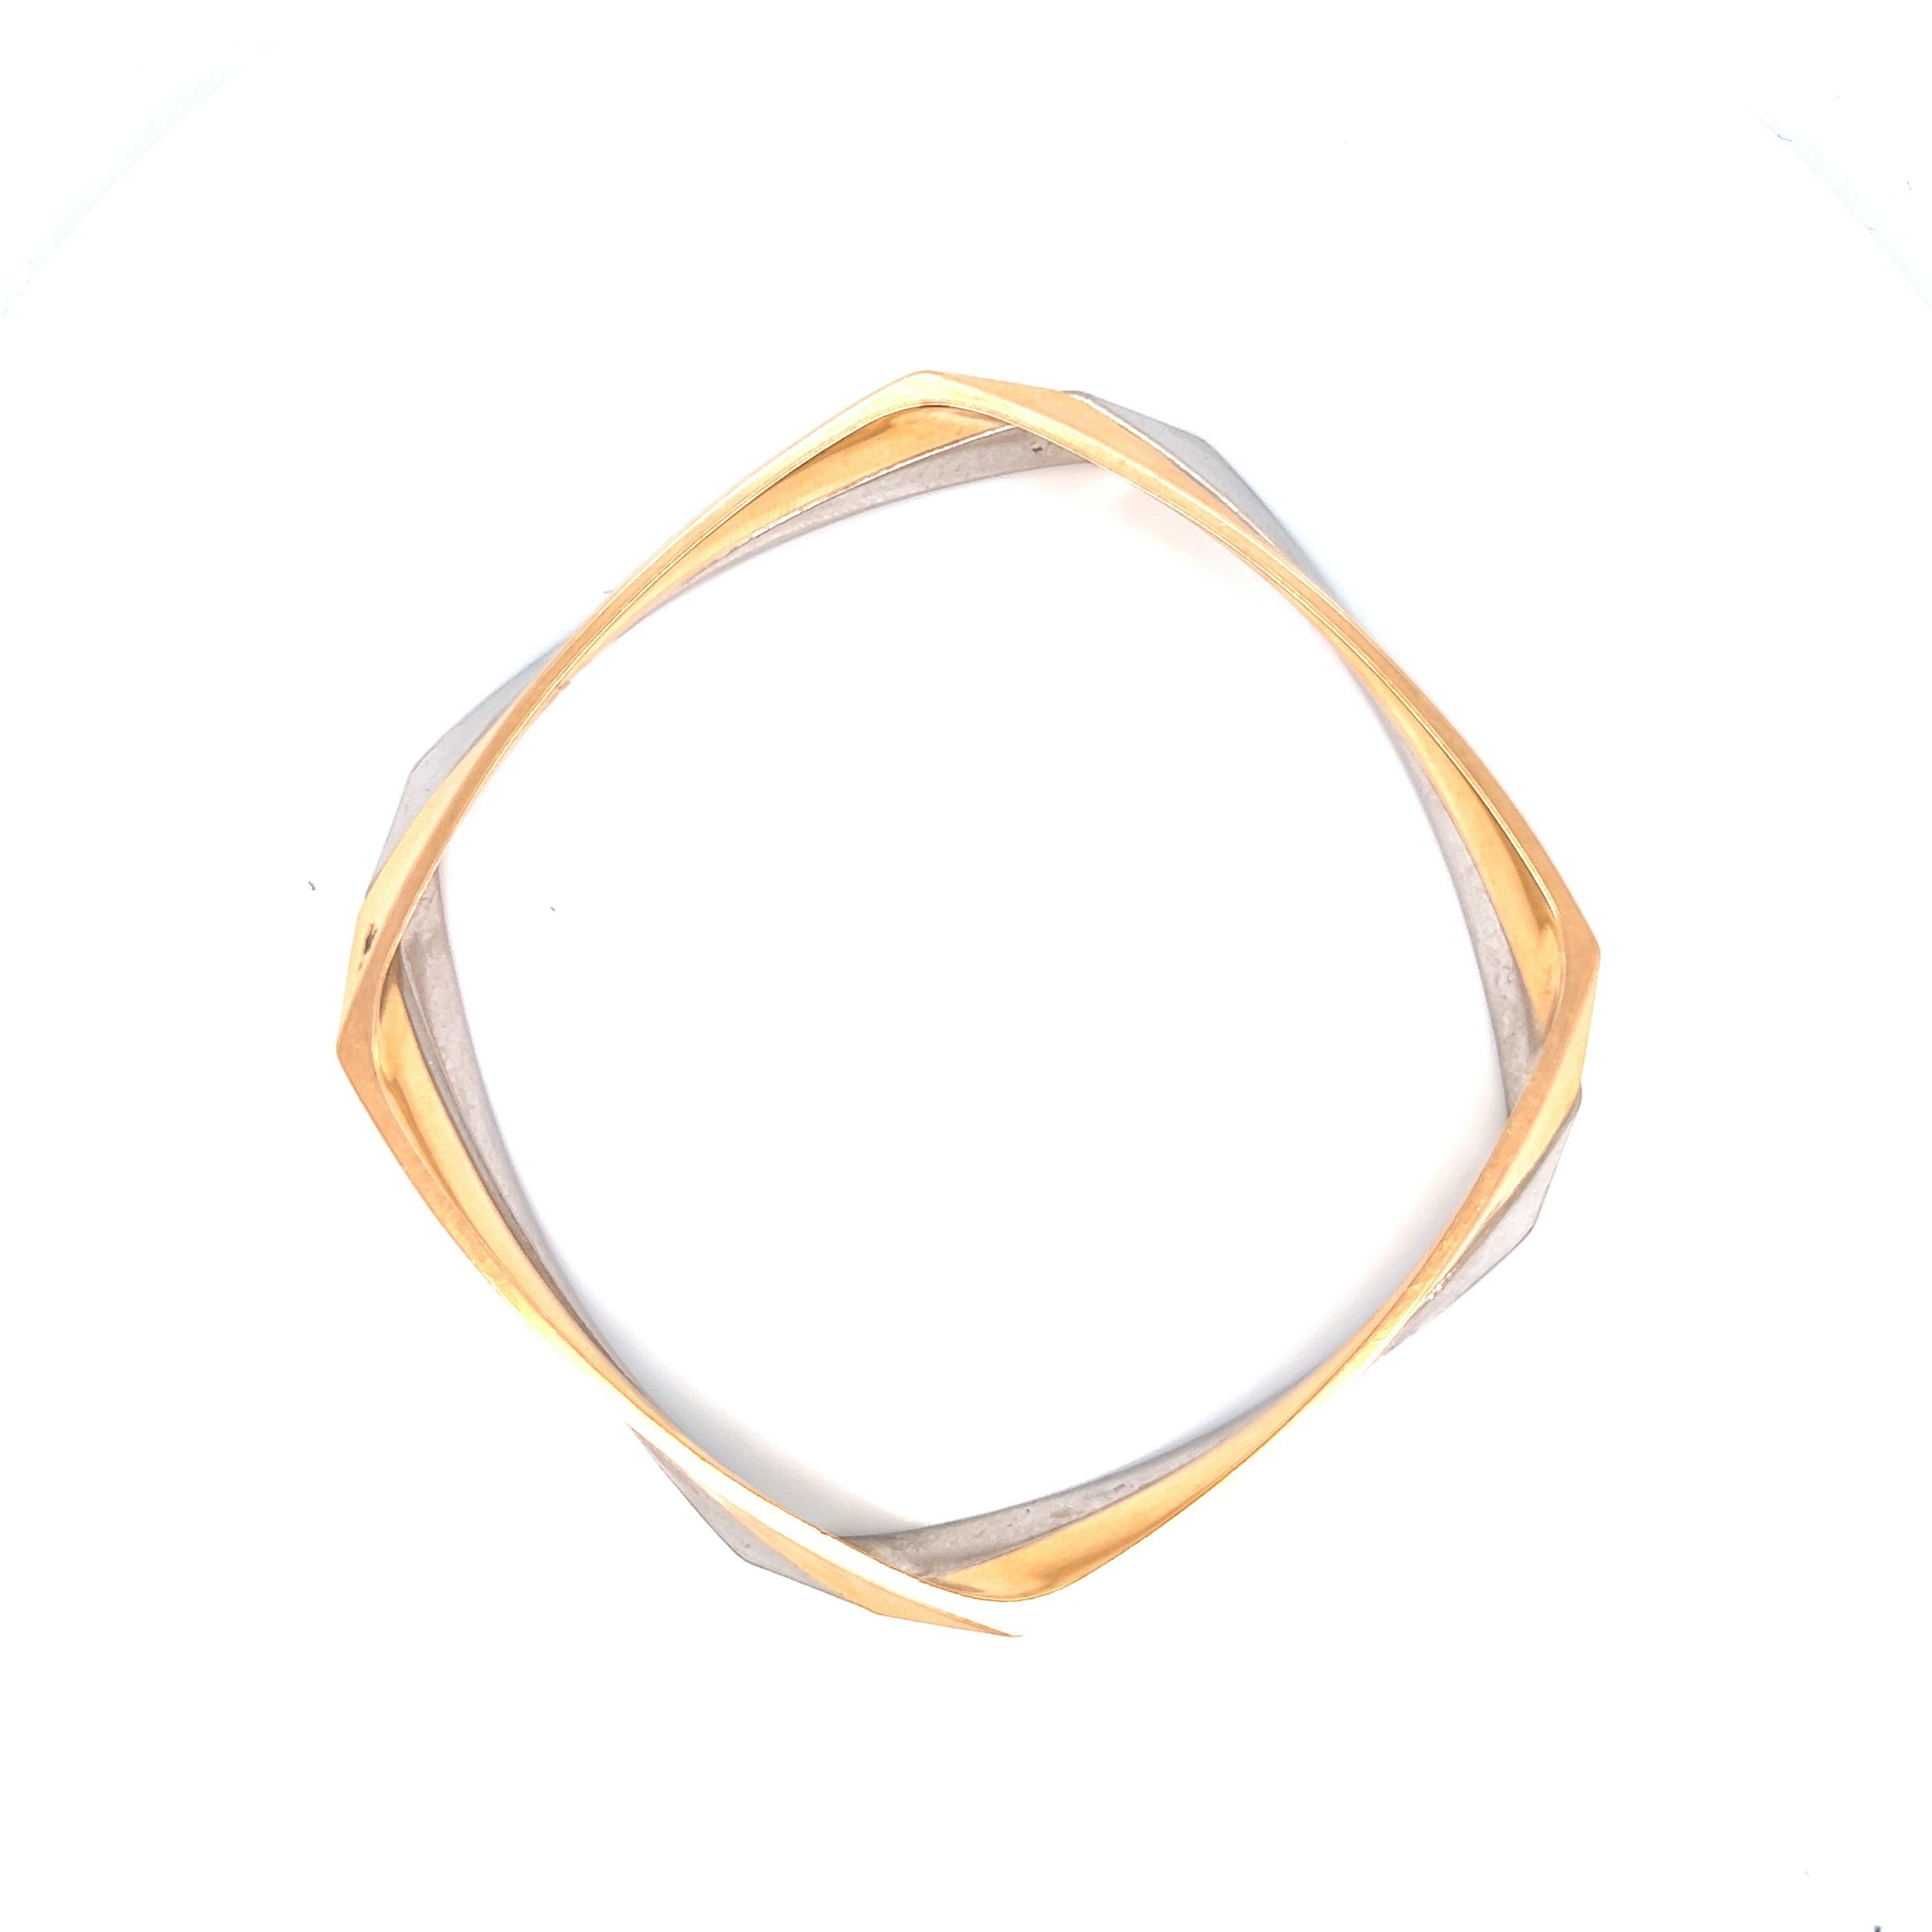 Contemporary Frank Gehry for Tiffany & Co. Torque White & Yellow Gold Bangles